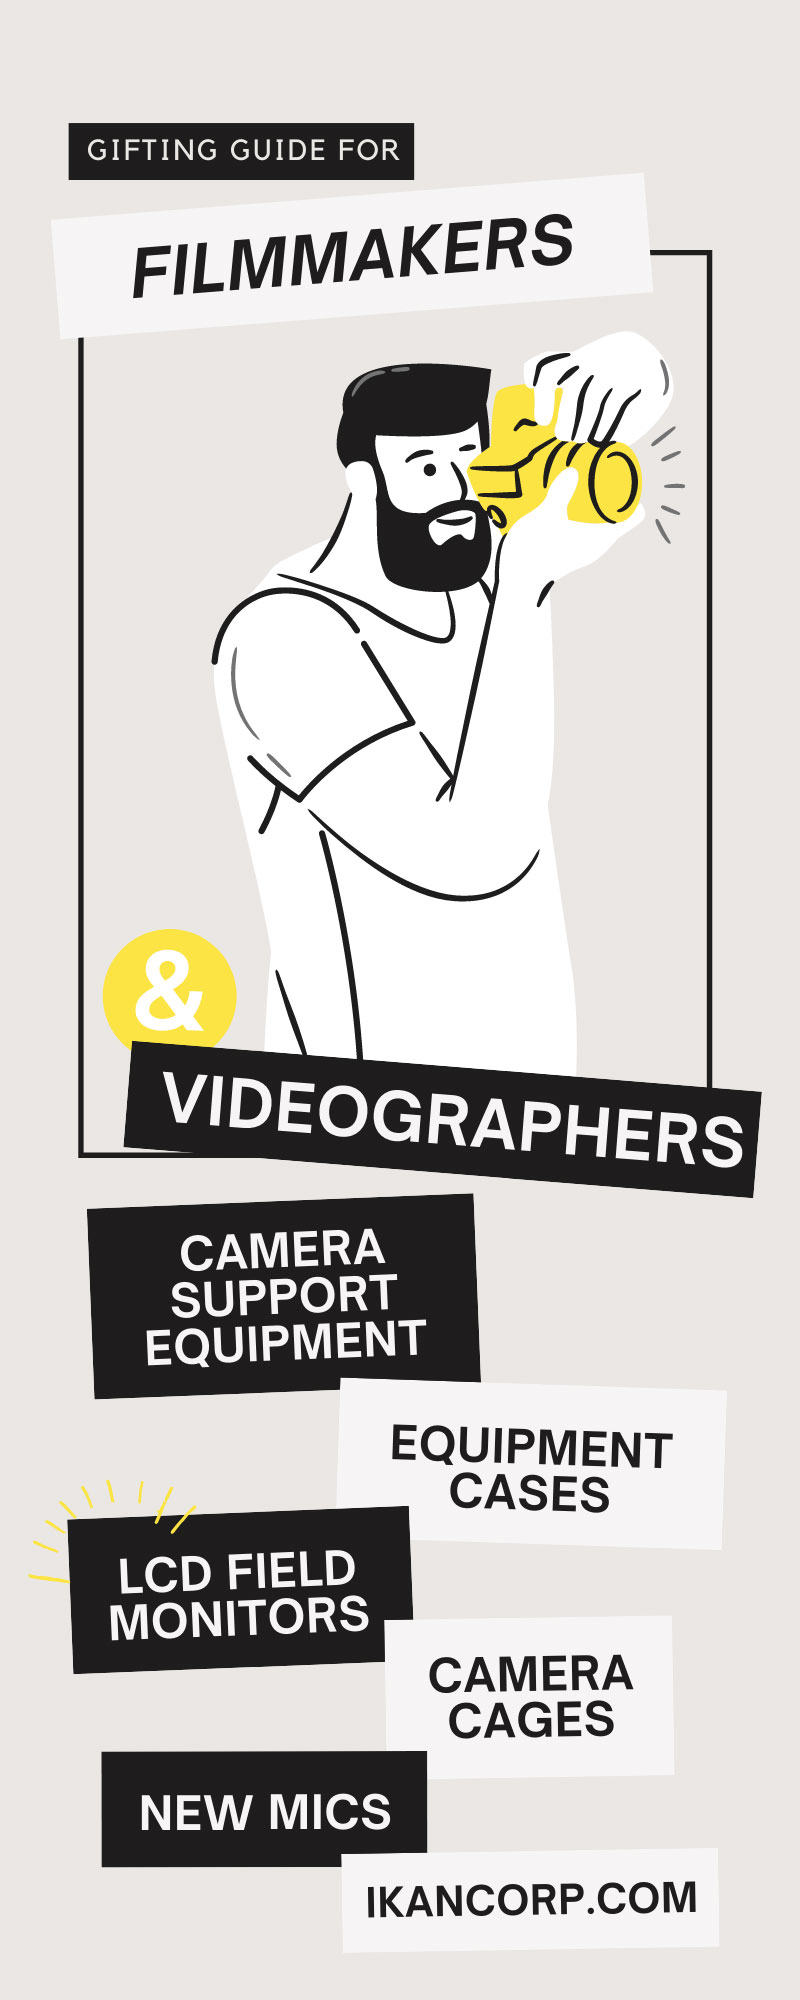 Gifting Guide for Filmmakers and Videographers